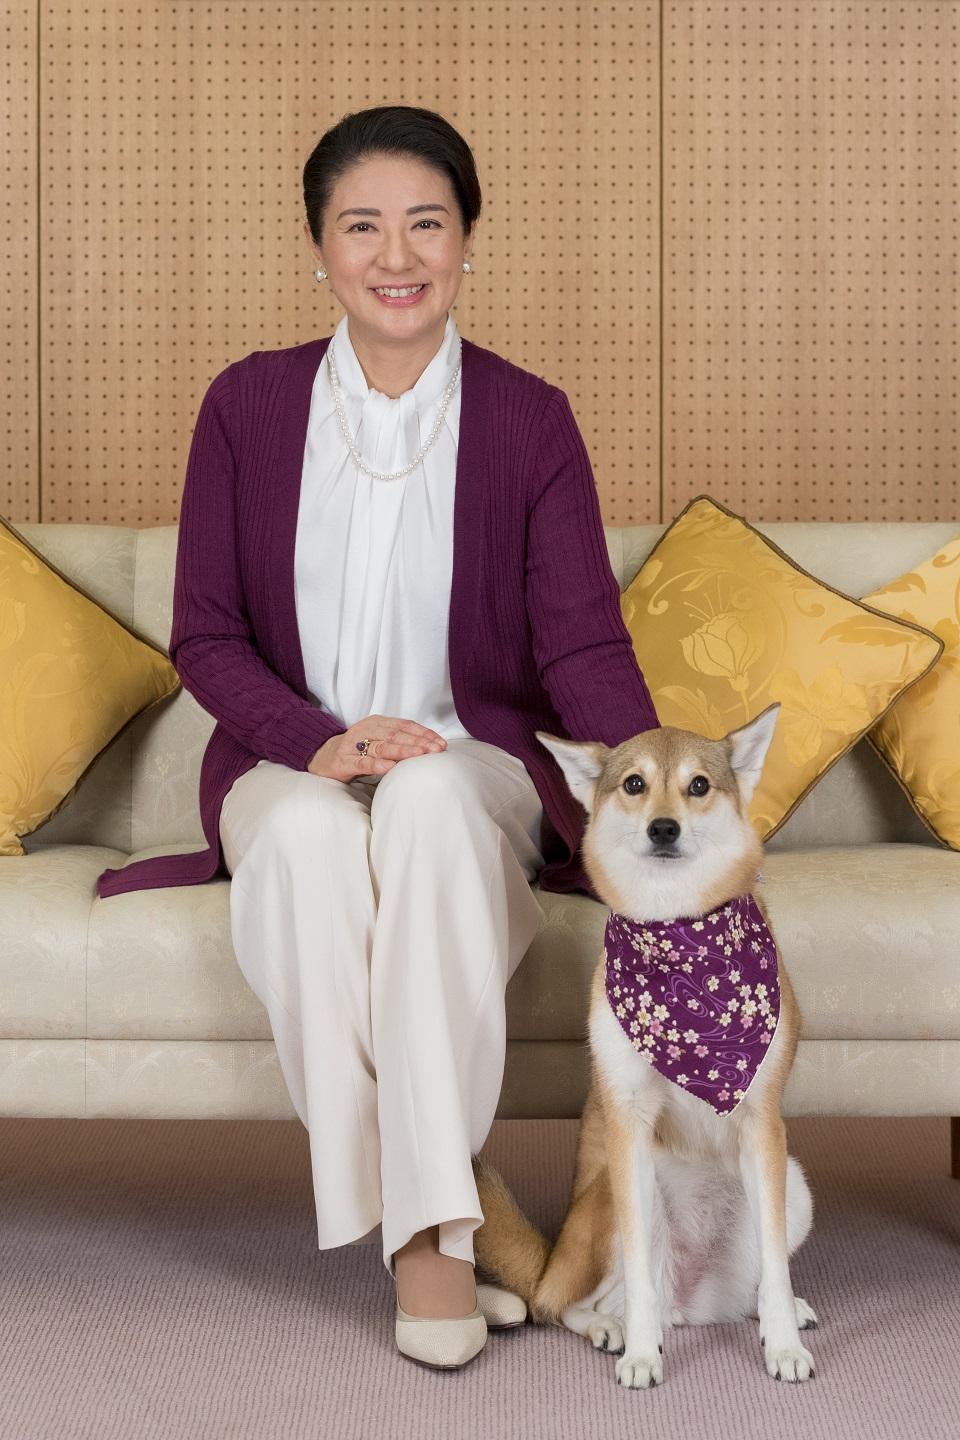 Japan's Crown Princess Masako, wife of Crown Prince Naruhito, poses for a photograph with her pet dog Yuri at Togu Palace in Tokyo on December 4, 2018. She celebrated her 55th birthday on December 9, 2018. AFP photo/Imperial Household Agency of Japan/Handout